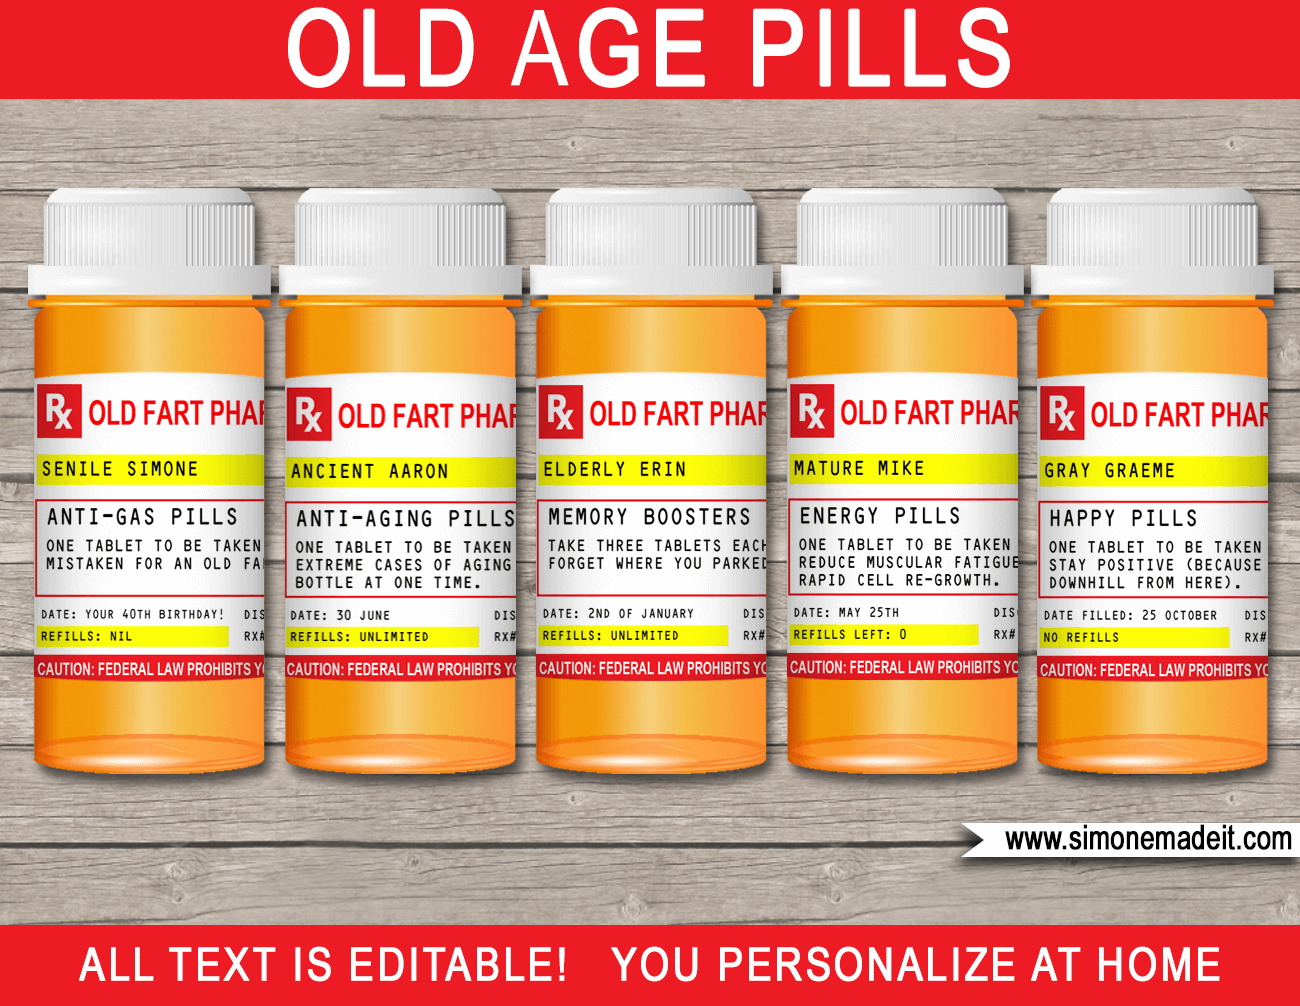 Over the Hill Pills | Old Age Pills | Gag Prescription Labels | Milestone birthday gift | 40th, 50th, 60th, 70th birthday gift | Prank gift | Practical Joke | Editable & Printable template | simonemadeit.com